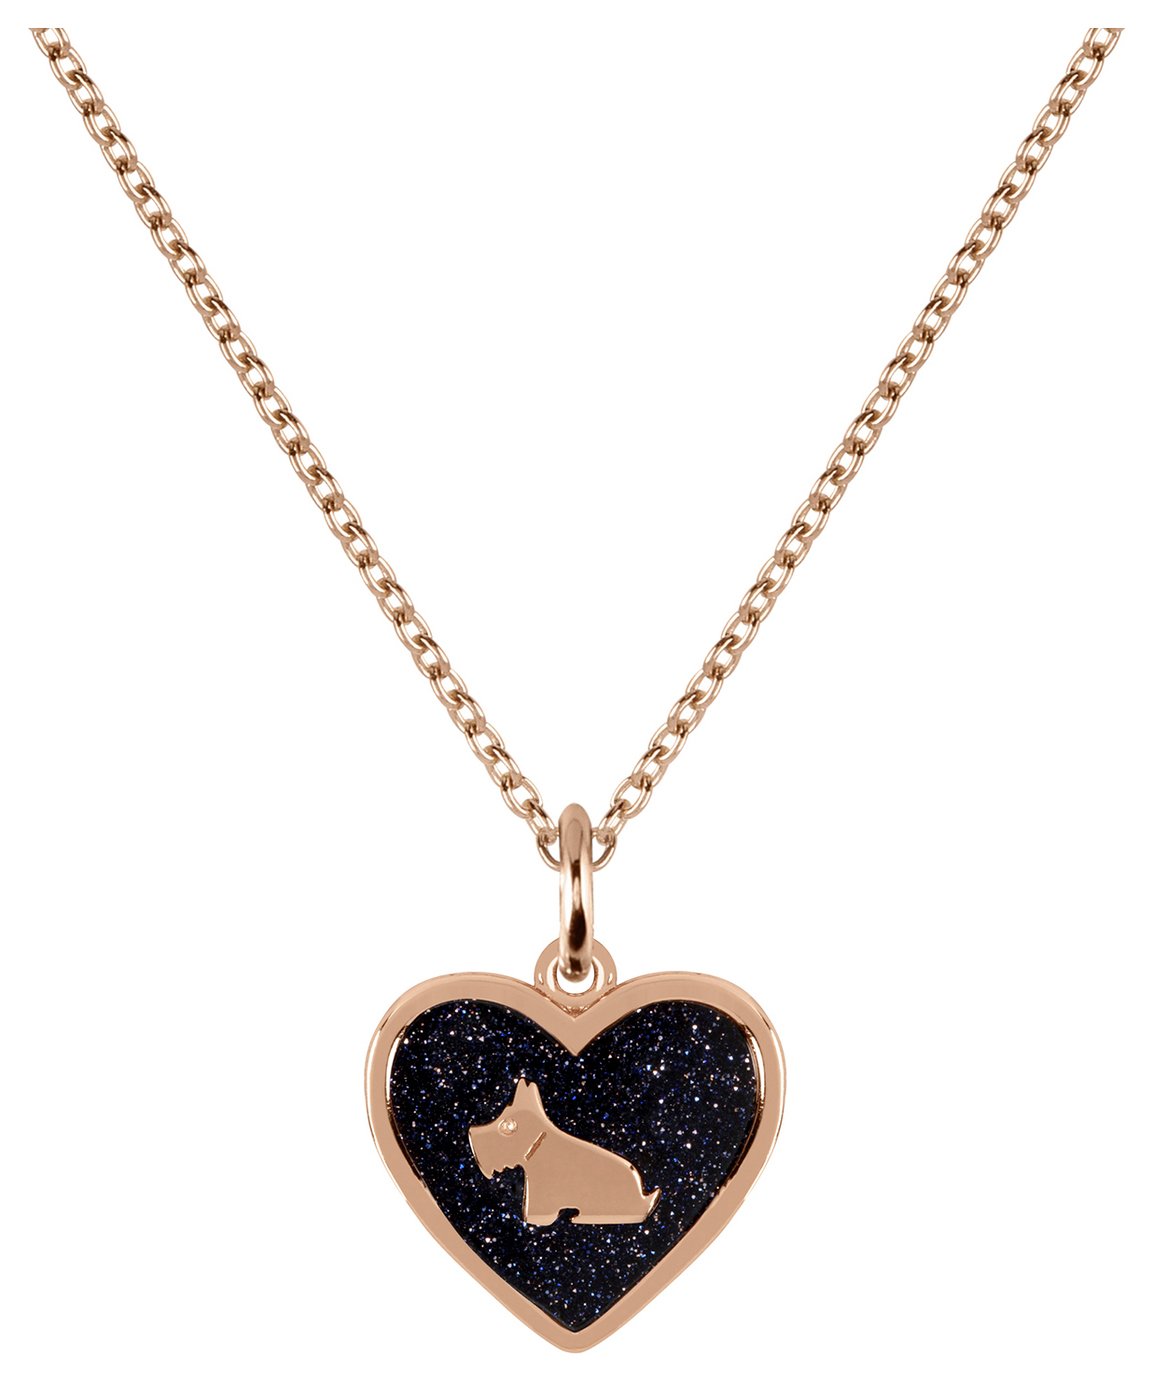 Radley 18ct Rose Gold Plated Sterling Silver Heart Necklace